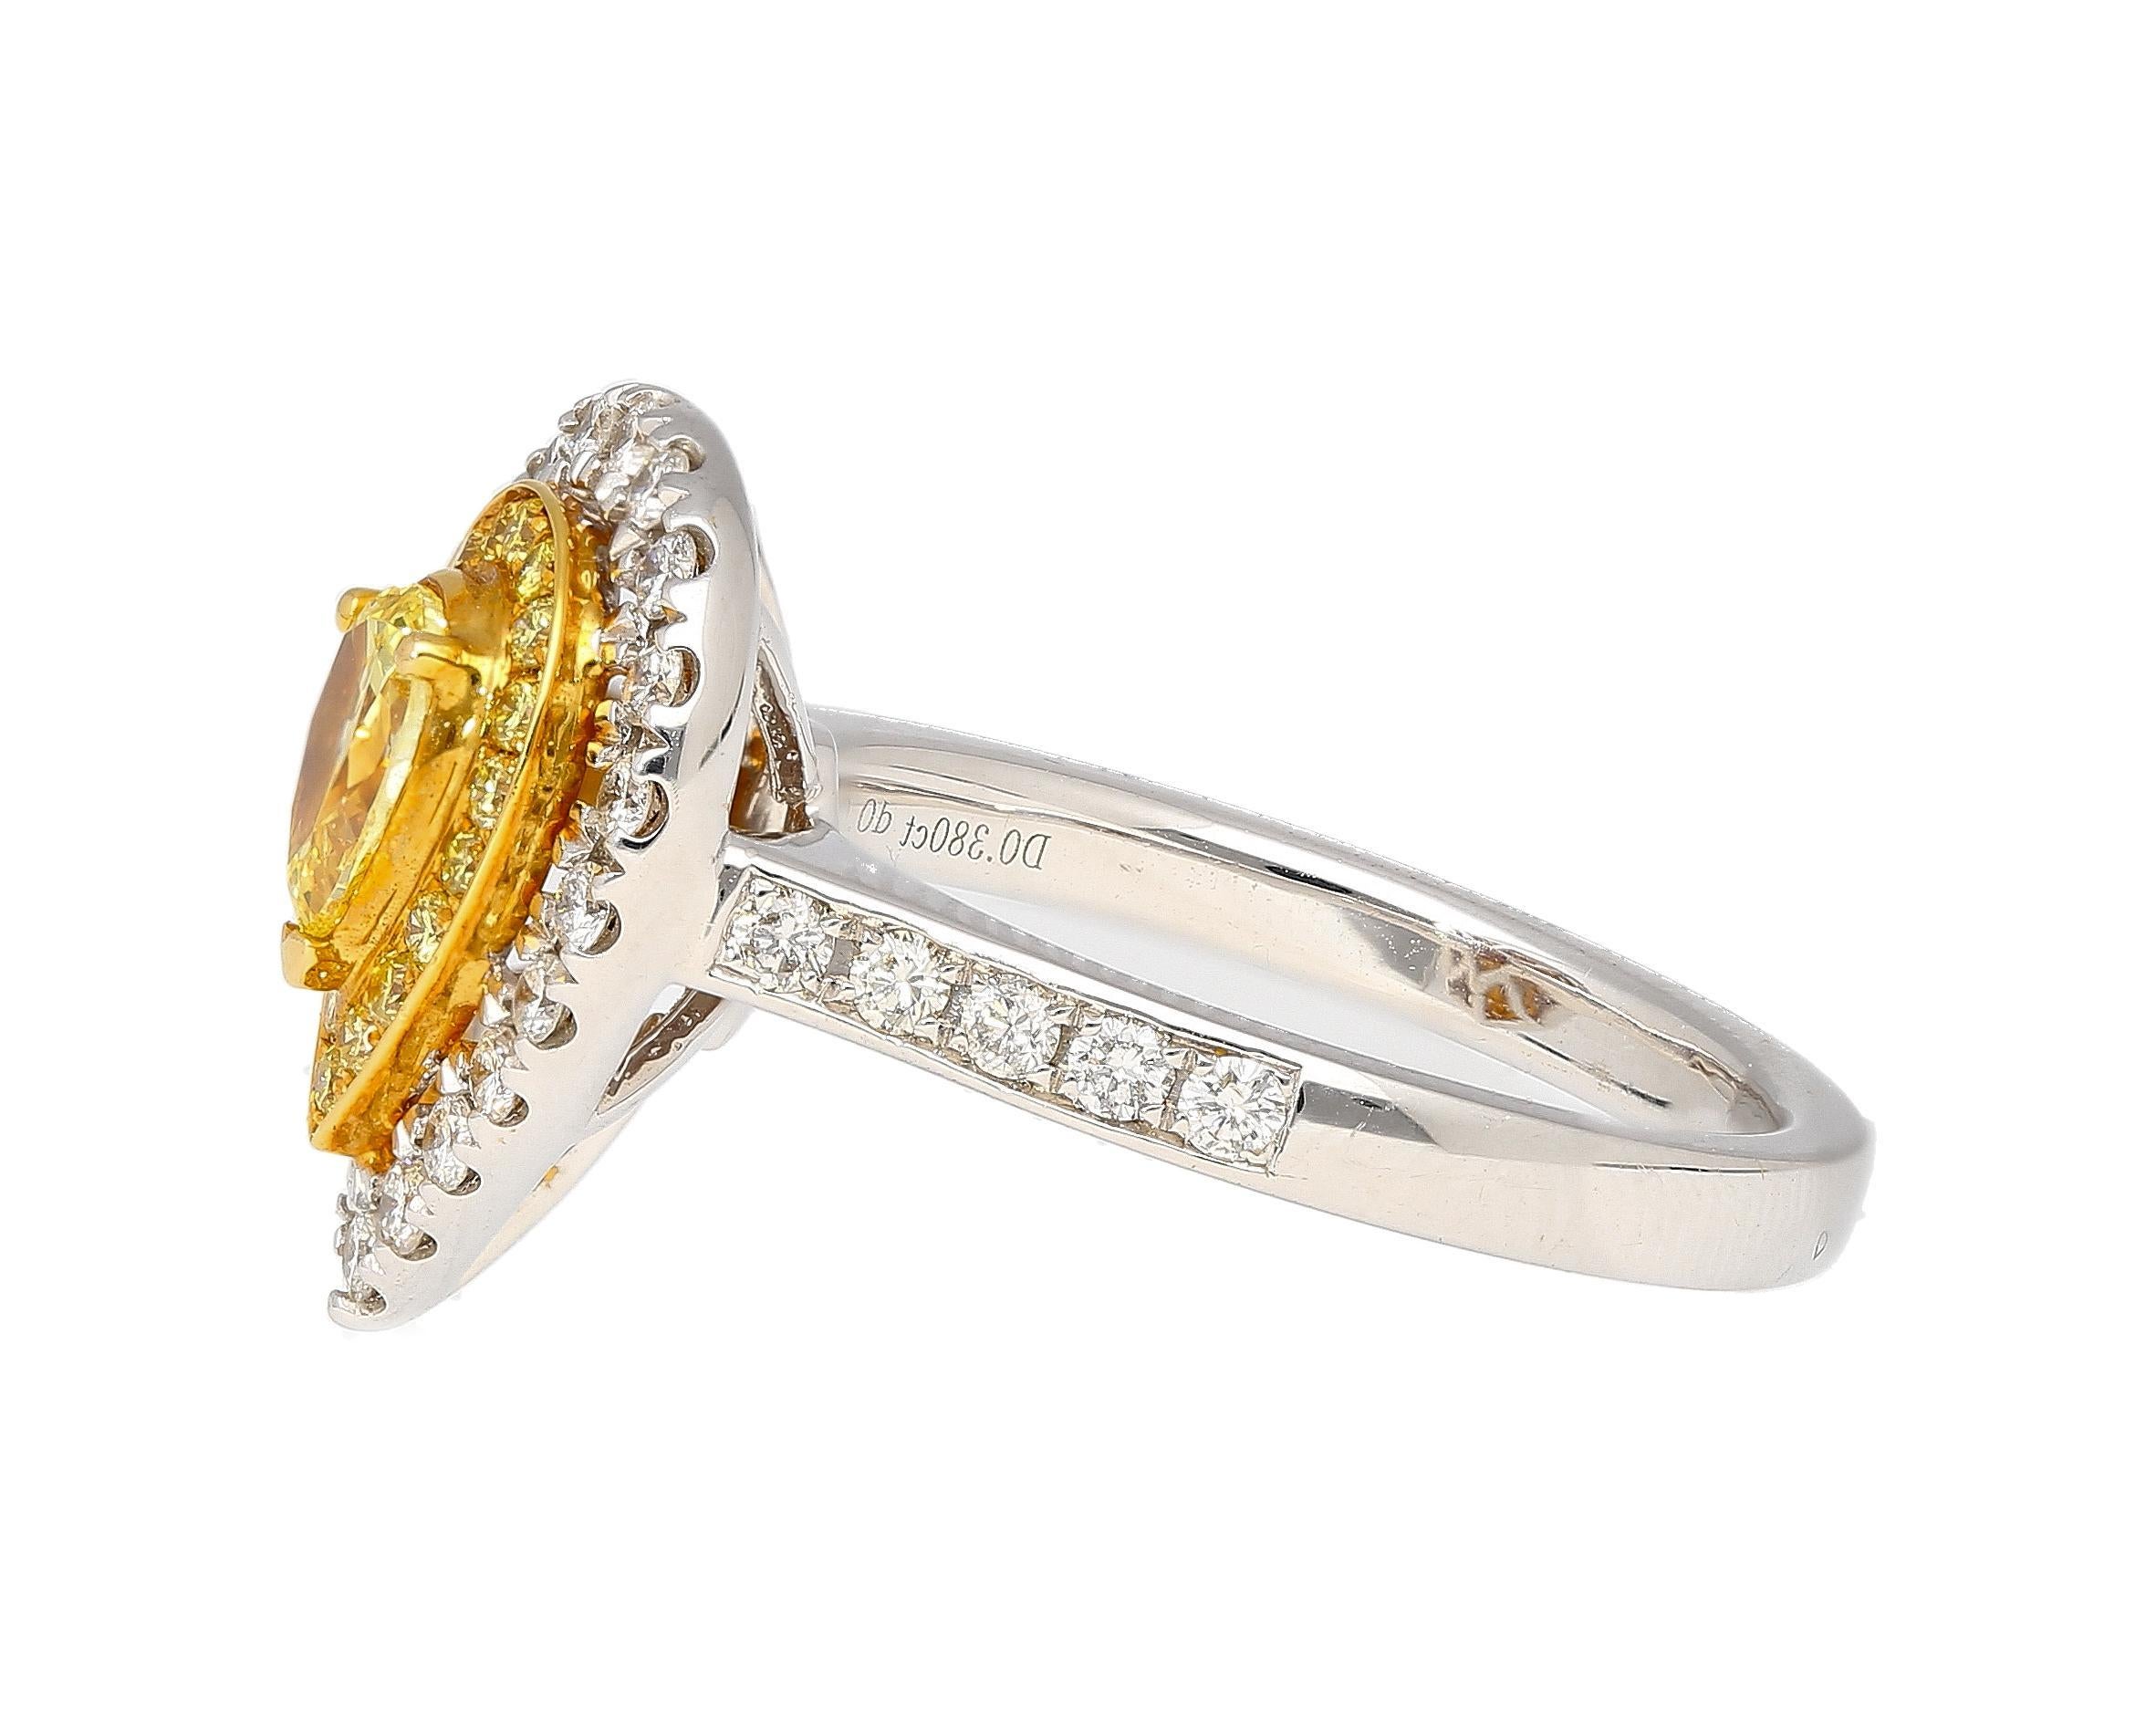 EGL Certified Fancy Vivid Yellow Pear Cut Diamond and Double Diamond Halo Two Tone Engagement Ring. 

Item Details:
- Type: Engagement Ring 
- Metal: 18K White, Yellow Gold 
- Weight: 6.40 grams 
- Setting: Prong 
- Ring Size: